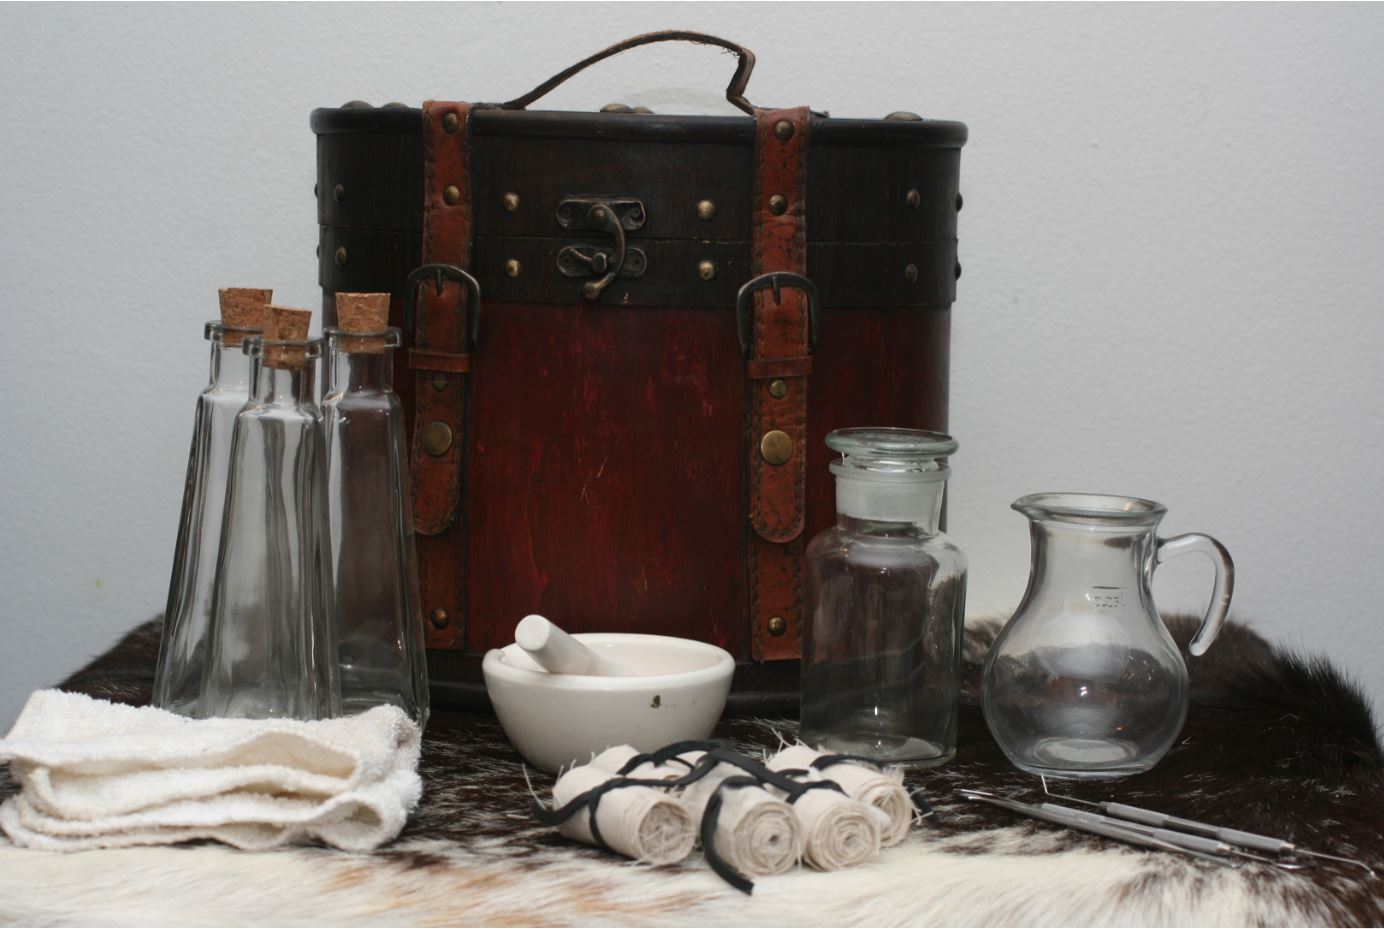 A Healer's Kit sits open and laid out [Photo Credit: Versalla]